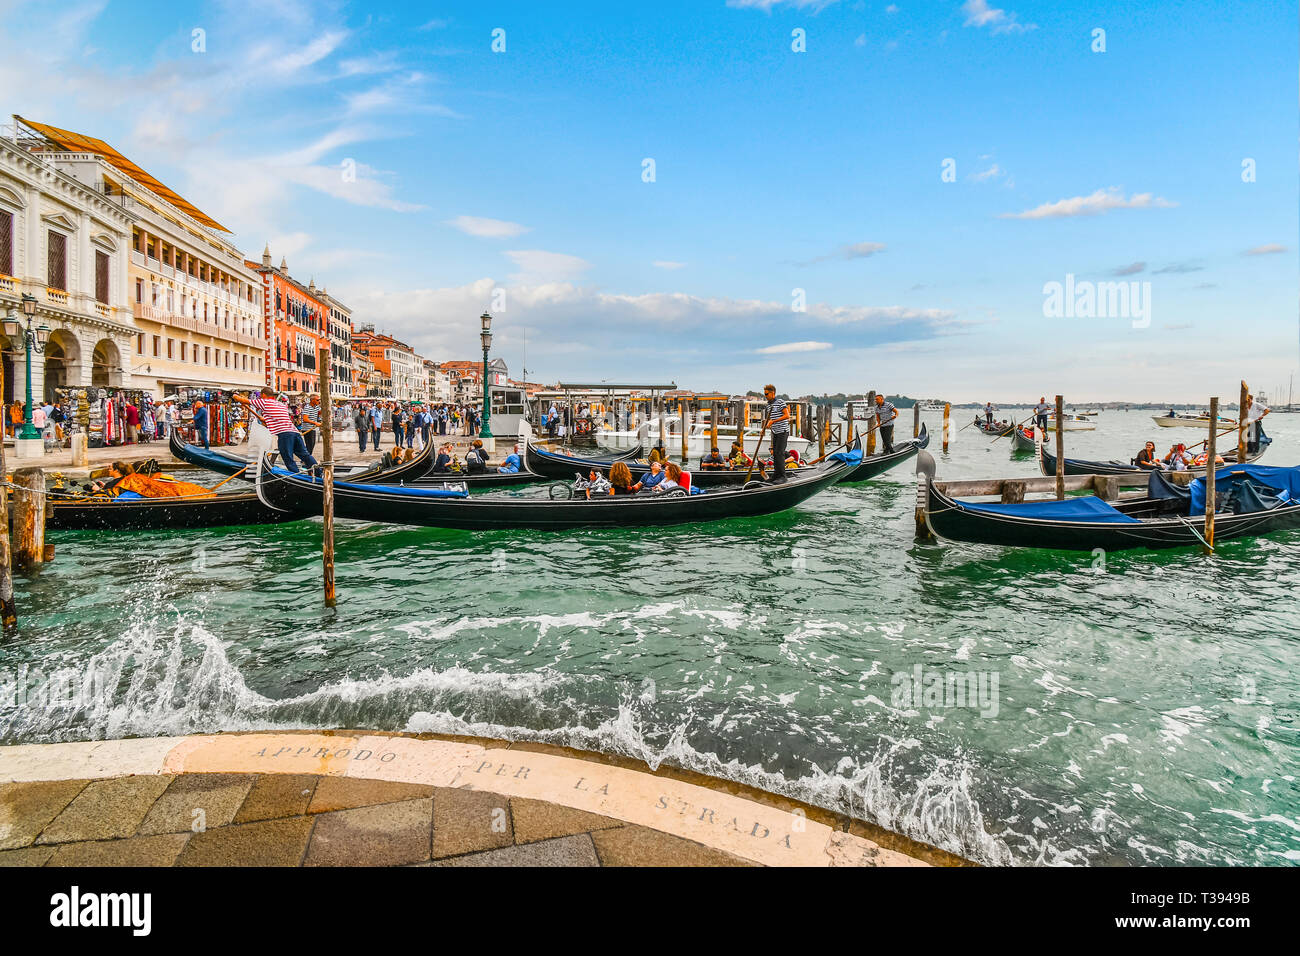 Tourists fill the gondolas at the Grand Canal station as visitors enjoy the Riva Degli Schiavoni shops and cafes along the promenade in Venice Italy Stock Photo